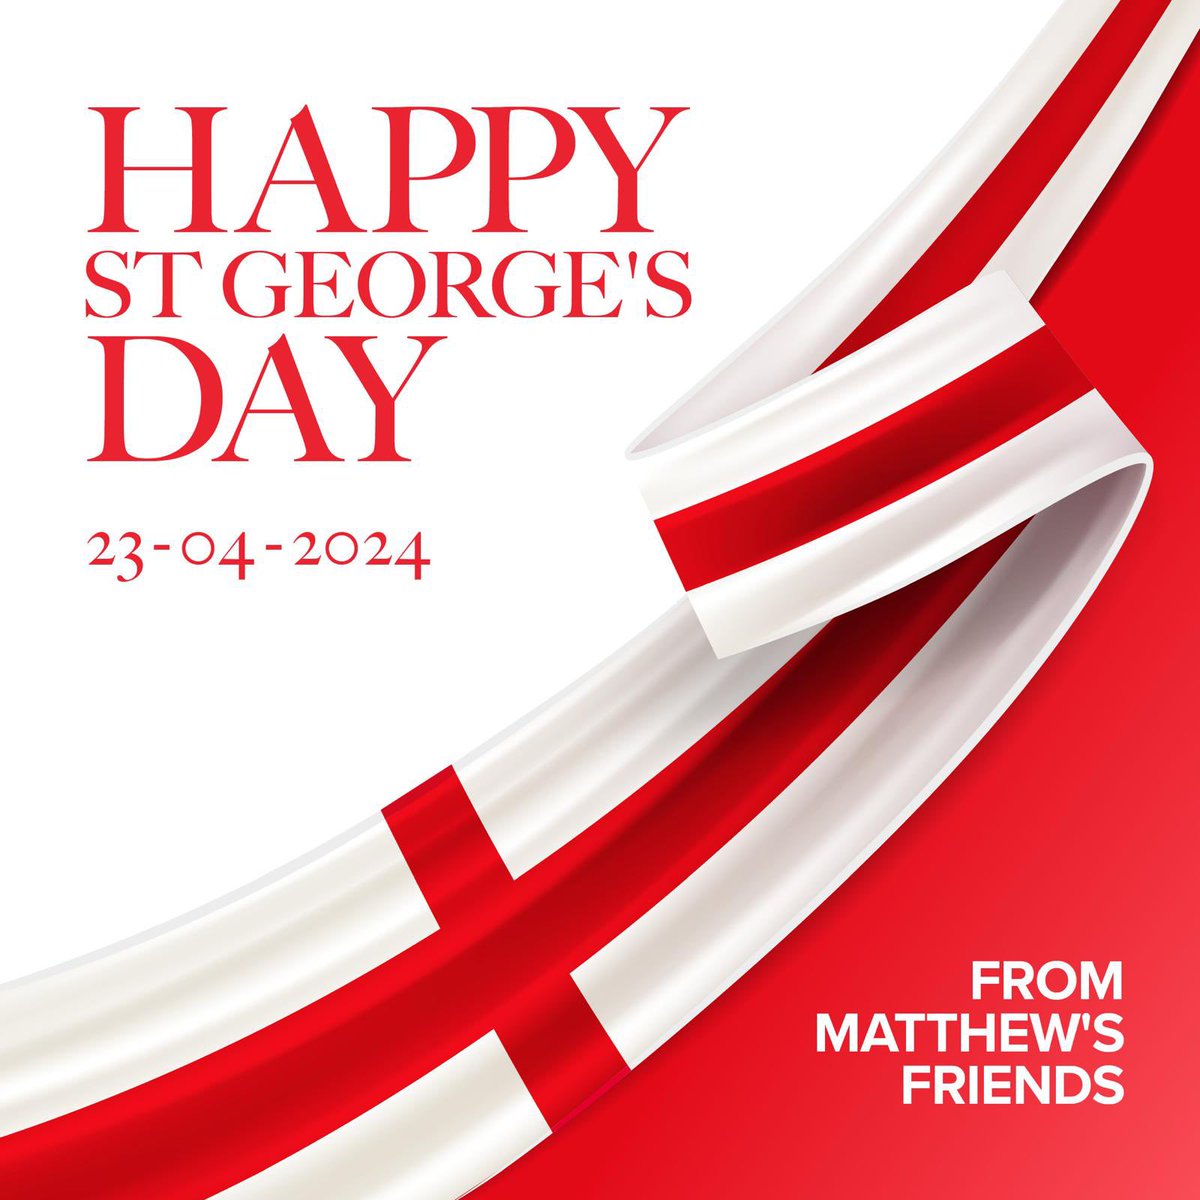 Happy St. George’s Day from us all at Matthew’s Friends #happystgeorgesday #ketogenic #medicalketogenicdiet